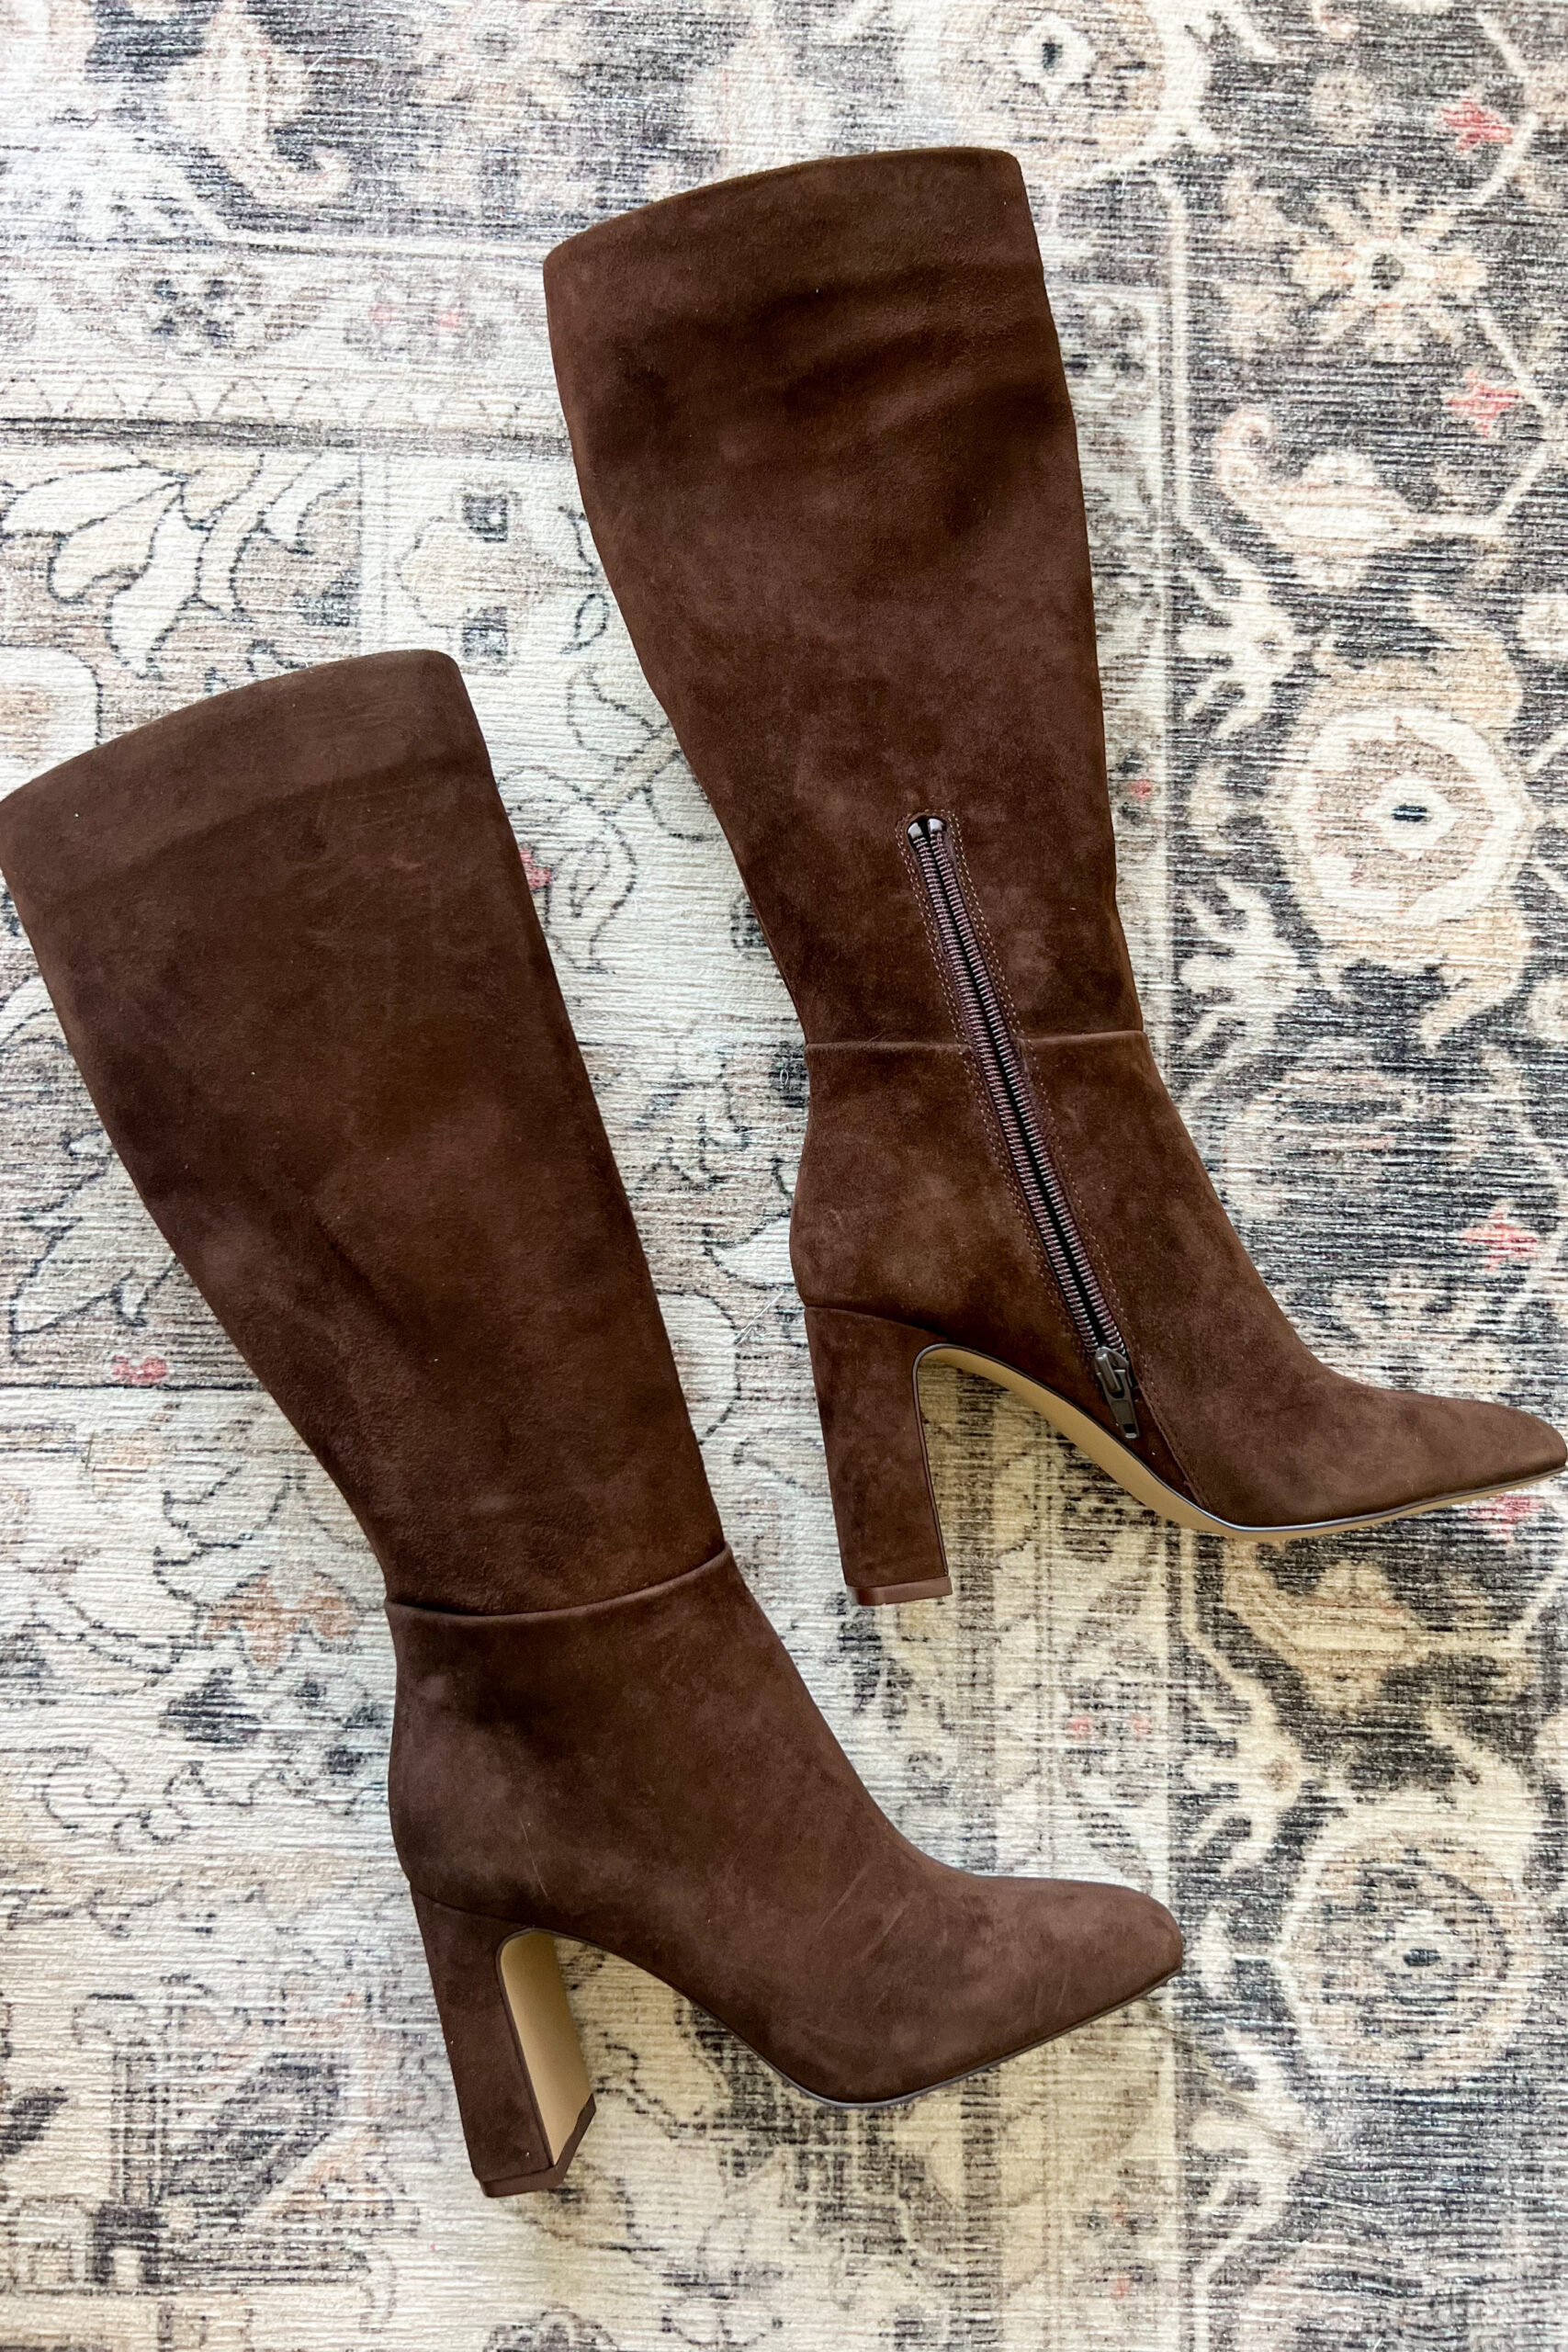 Petite-friendly knee high boots via pumps and push-ups blog | Nordstrom anniversary sale finds | petite fashion 